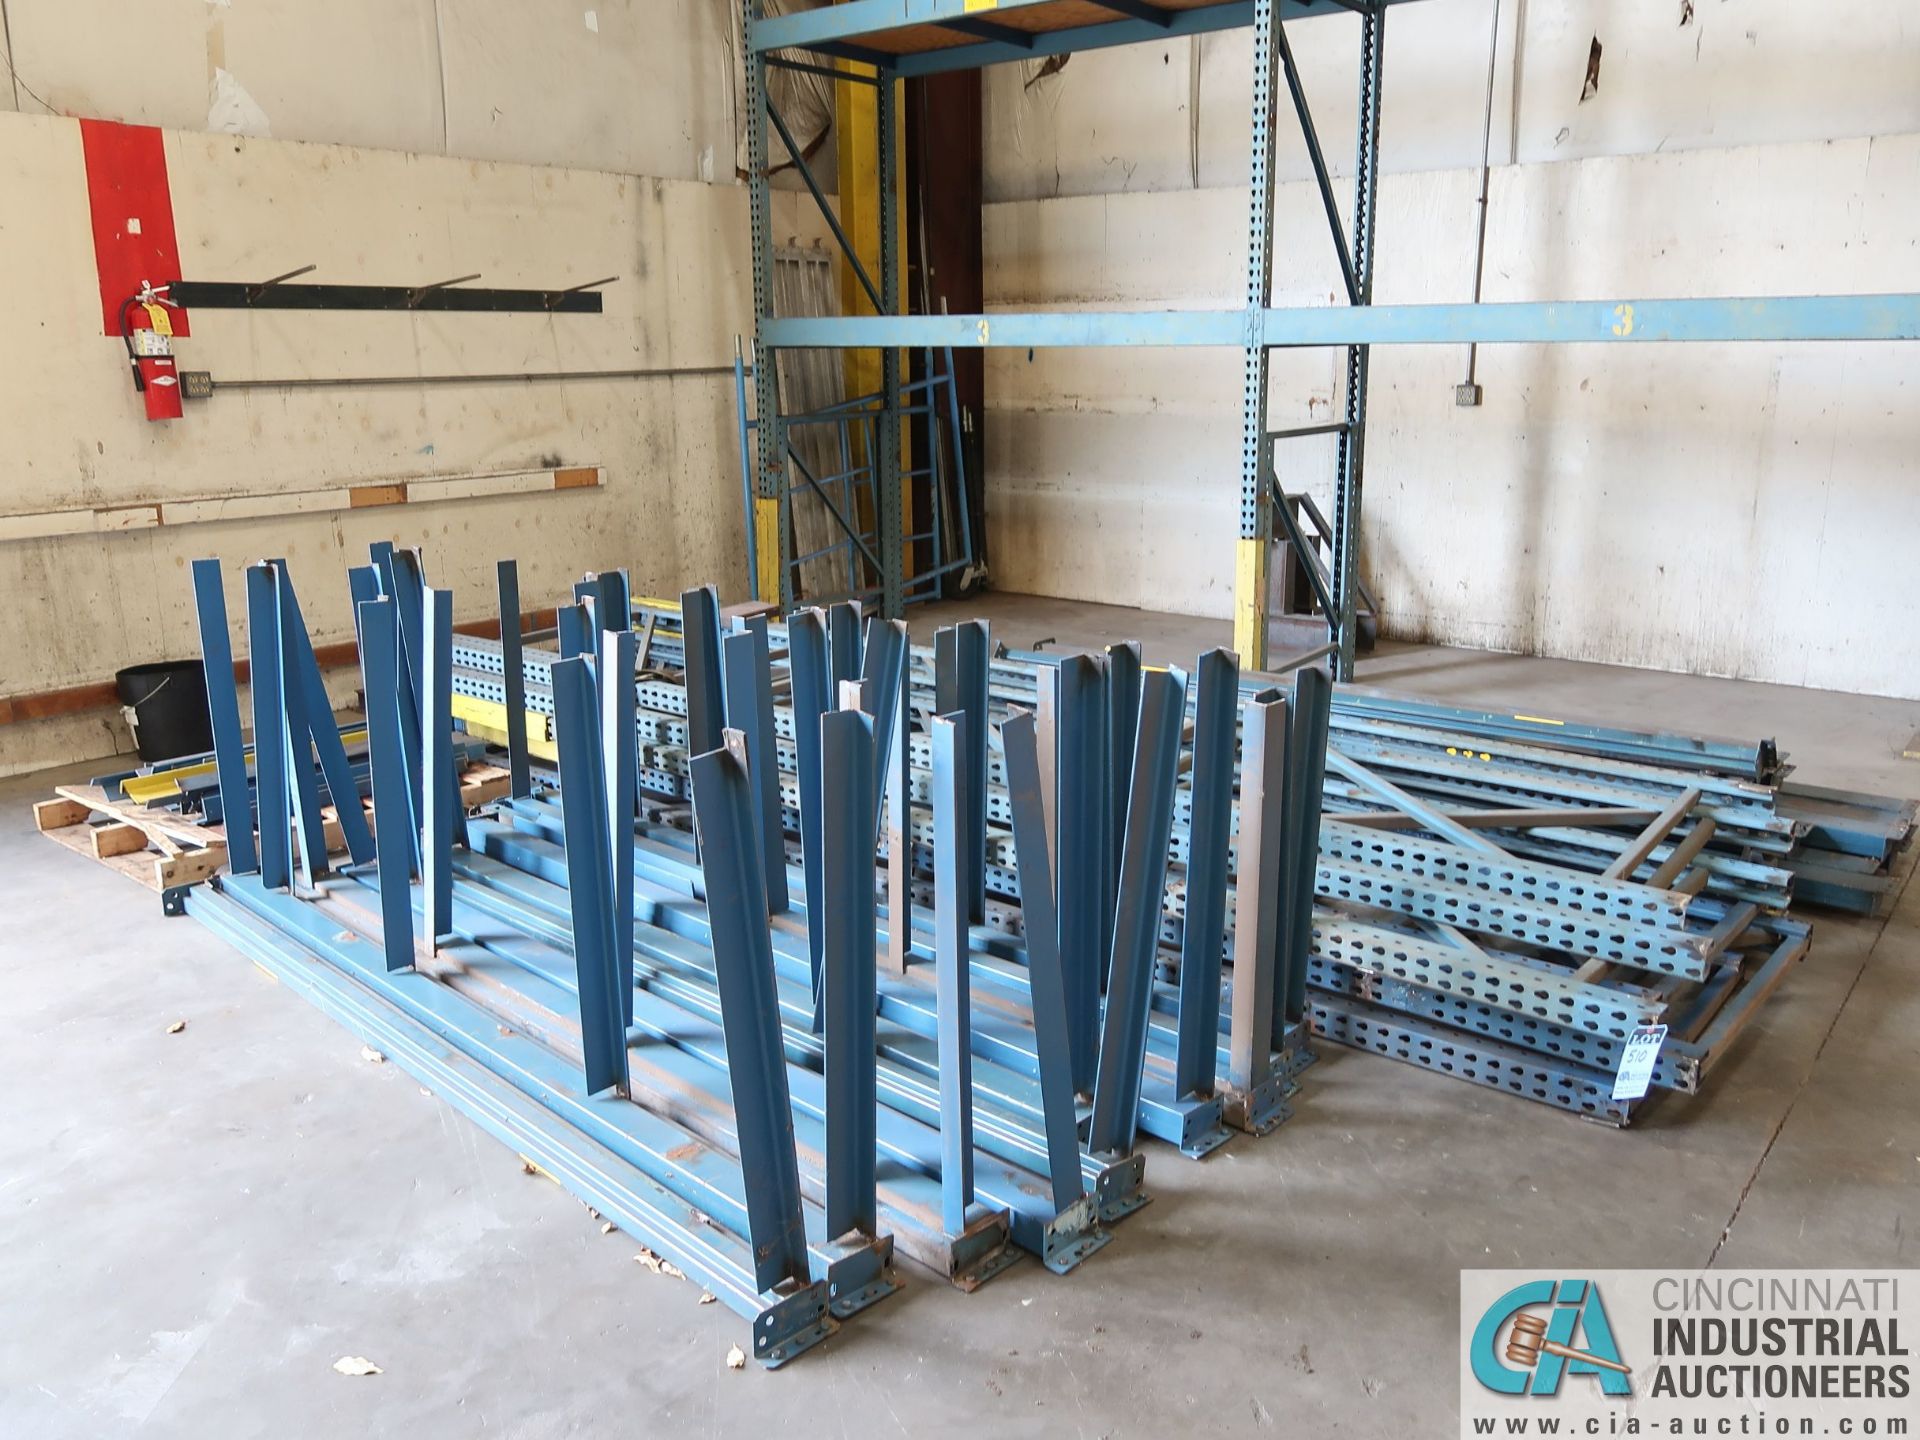 (LOT) (3) 42" X 180" AND (4) 38" X 180" UPRIGHTS, (9) 108", (6) 118", (7) 144" CROSSBEAMS **